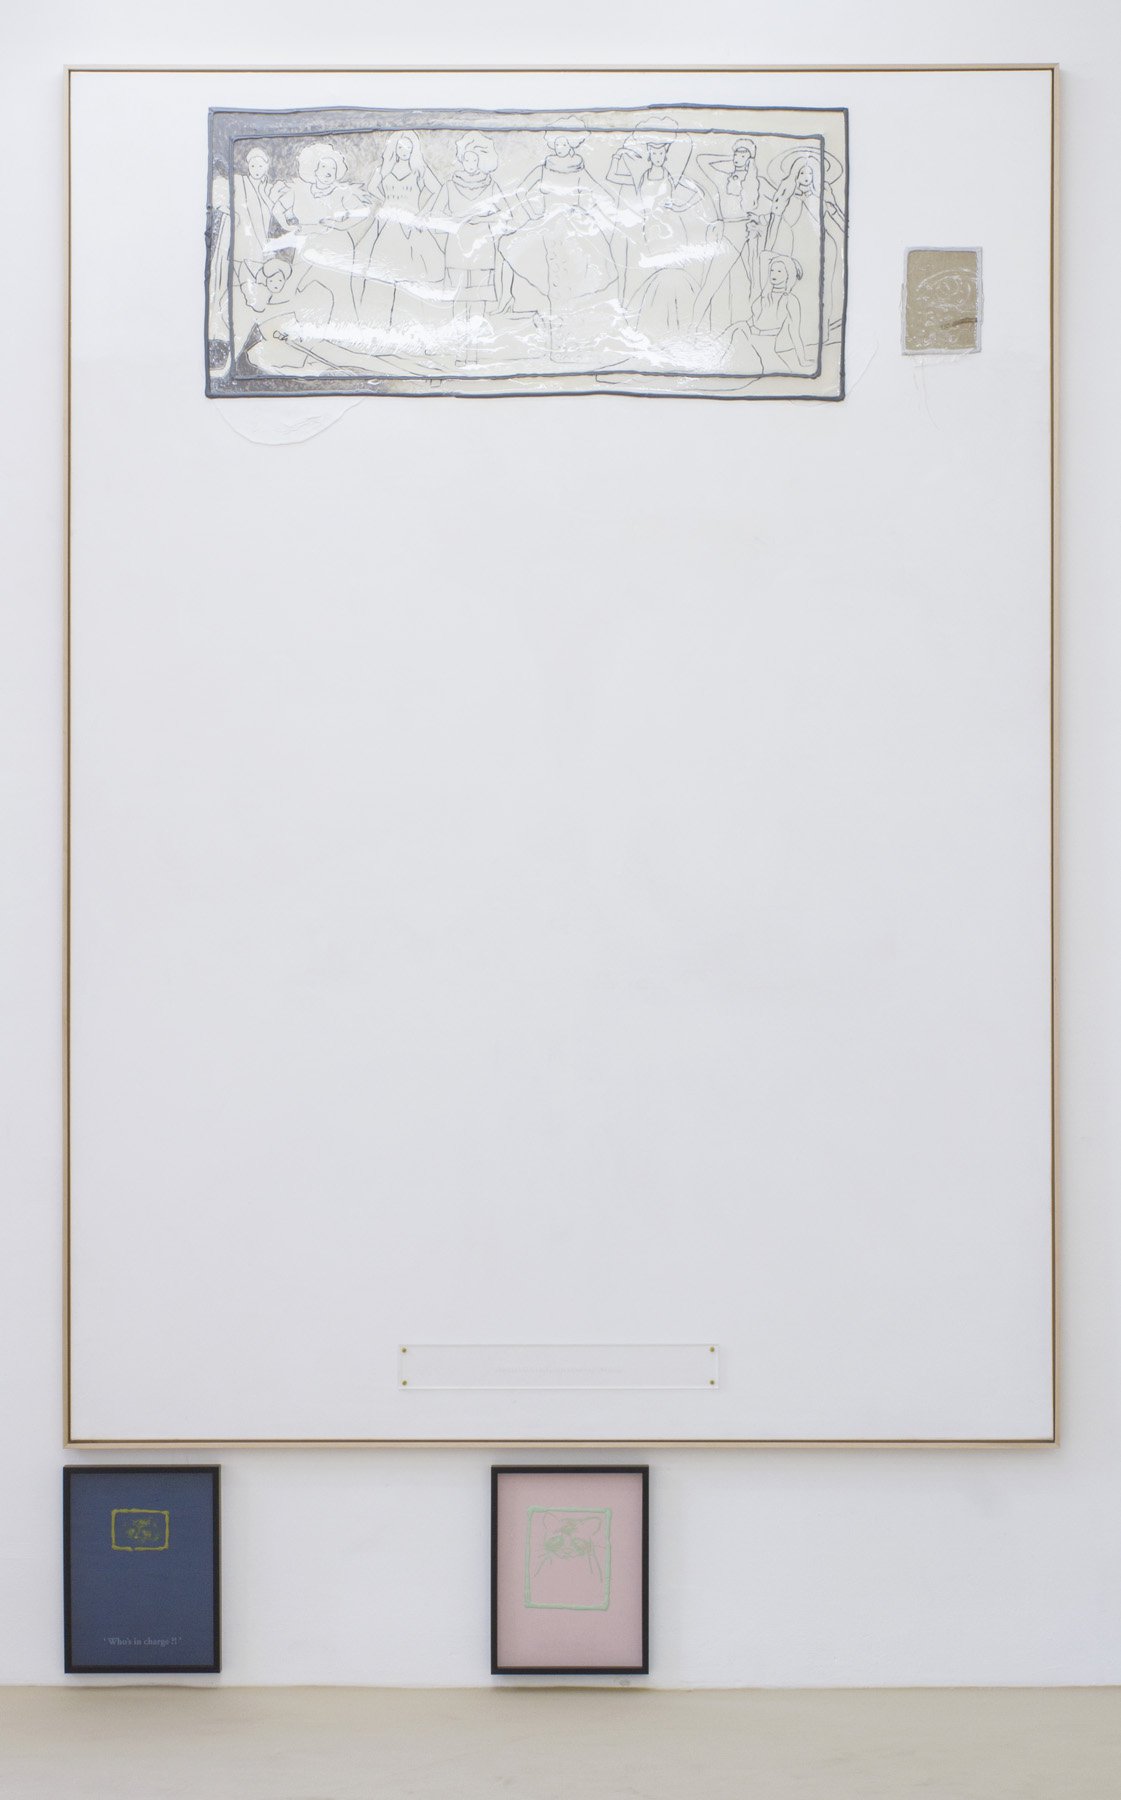 Philipp TimischlBorn to fish, forced to work., 2017Mixed media on canvas with engraved acrylic glass and frame283 x 203 cm